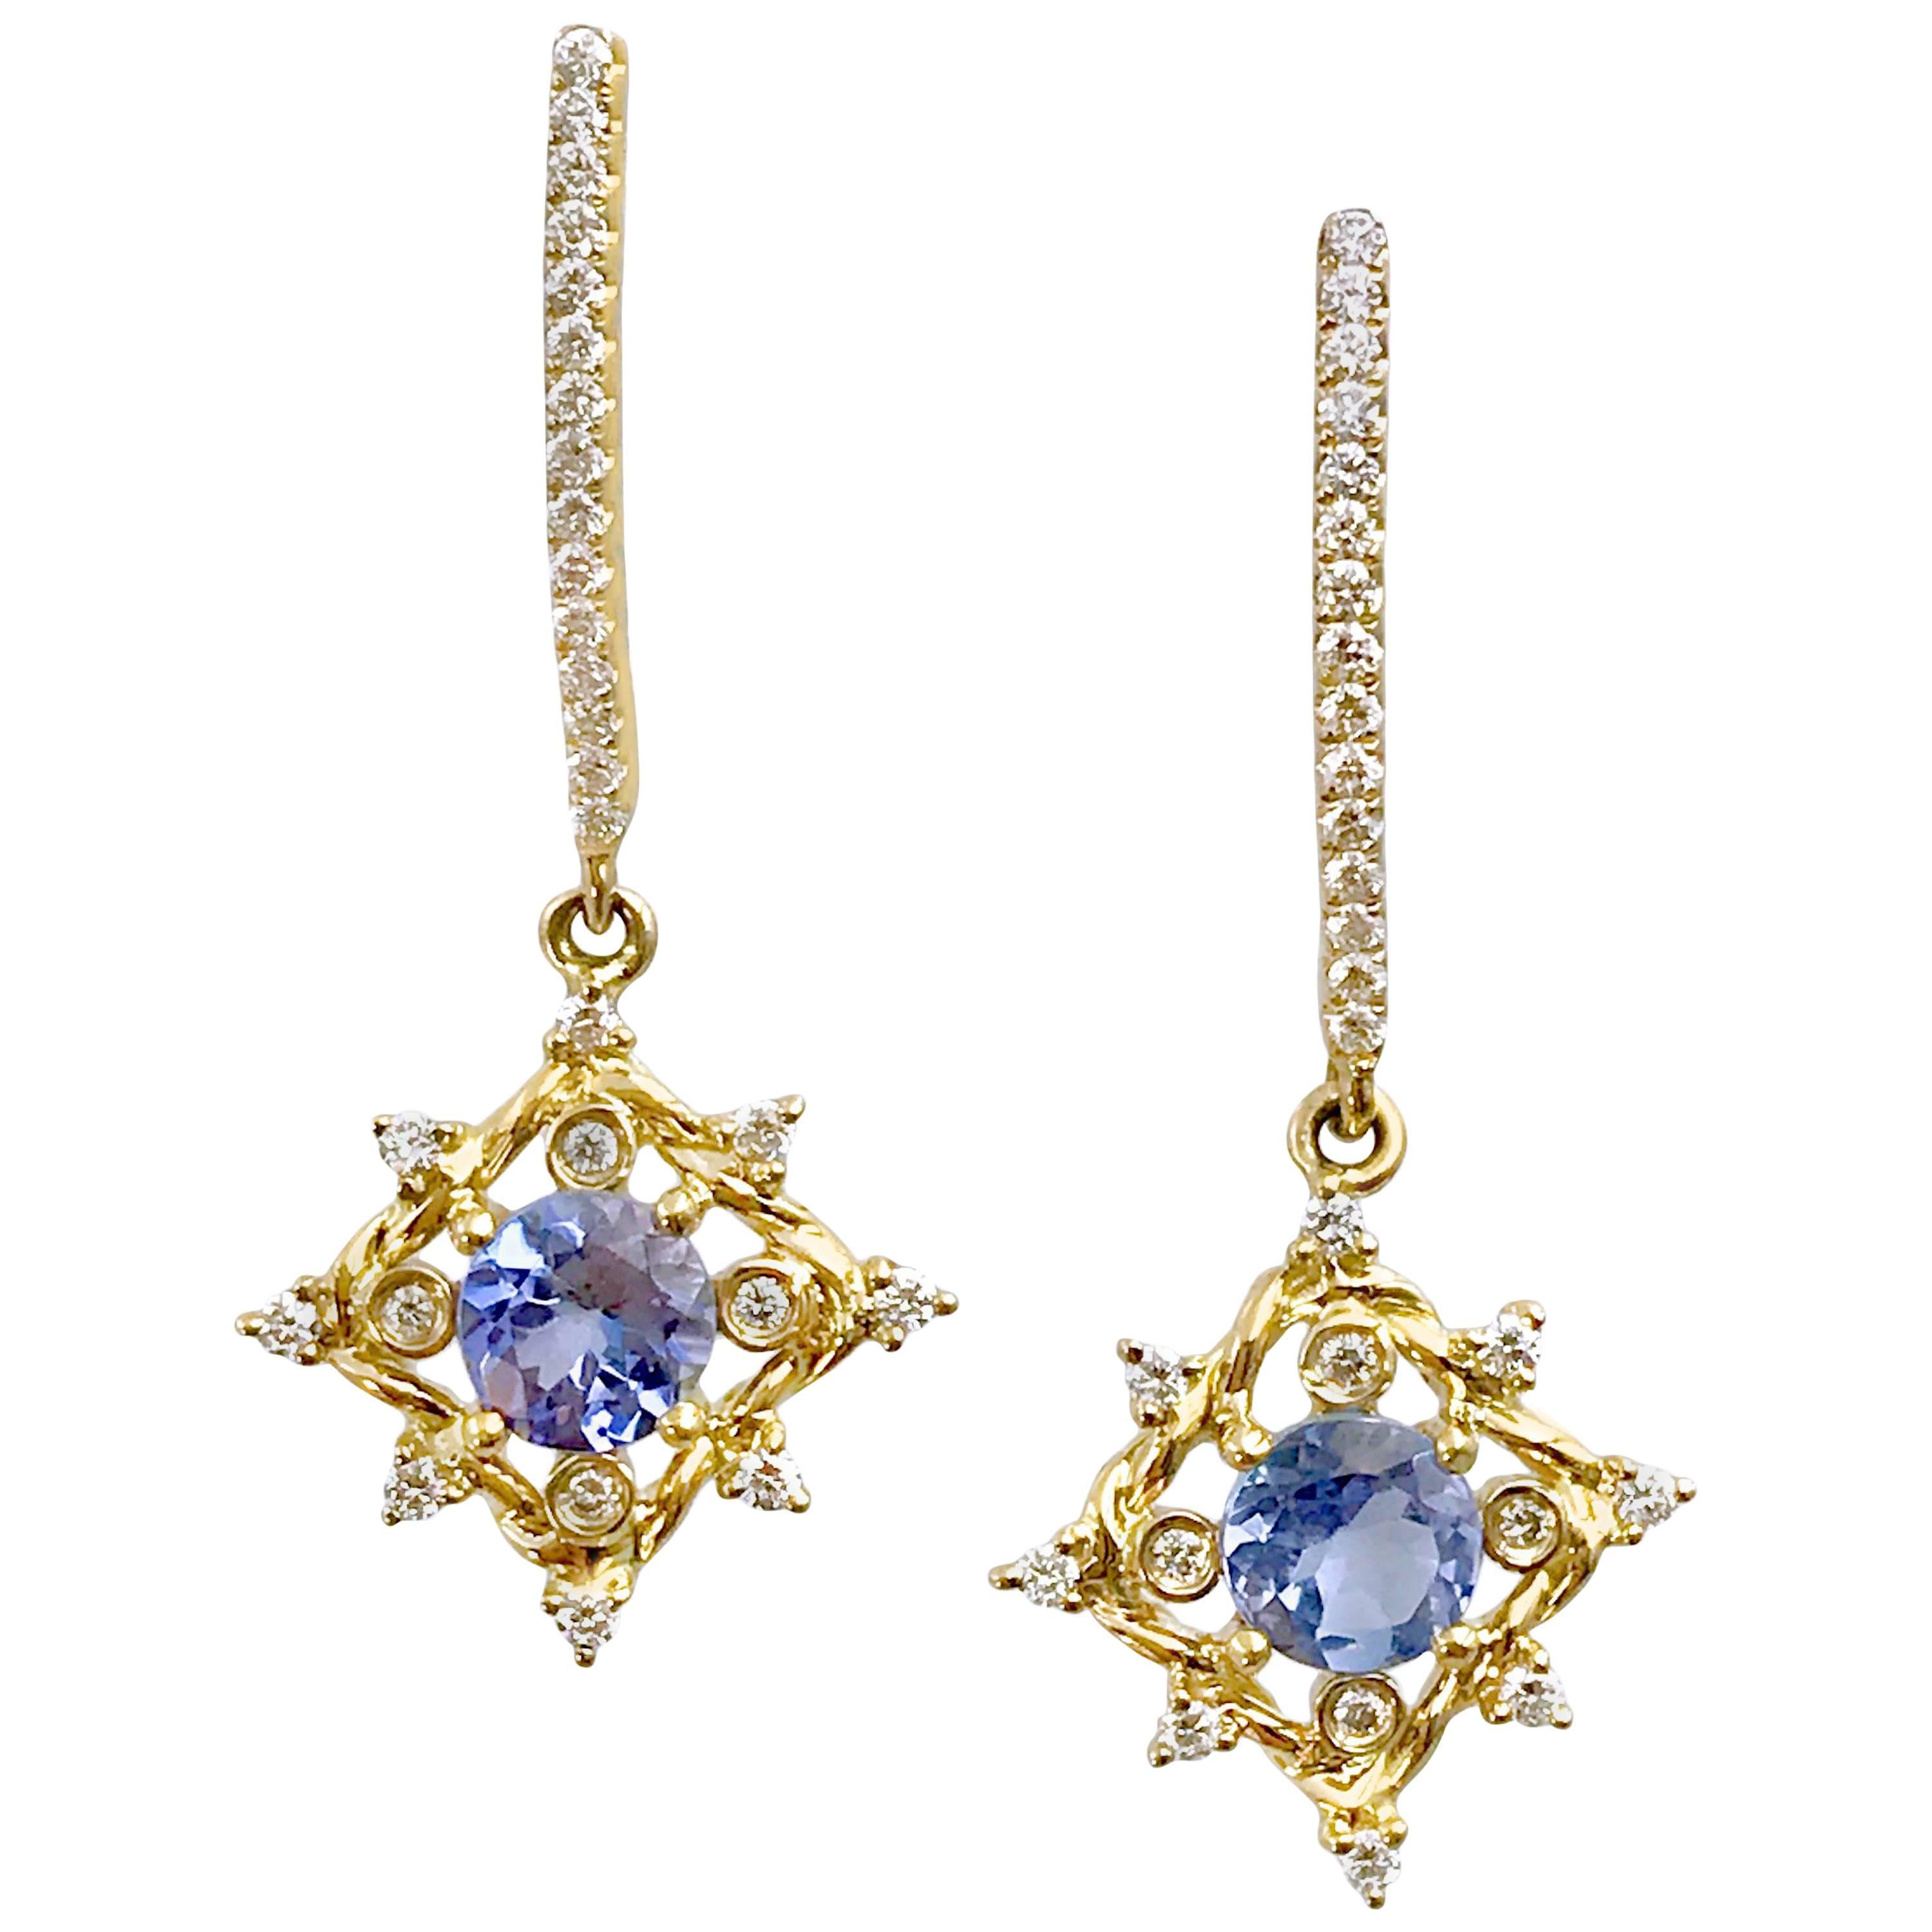 Crown Jewelry 14 Karat Gold Plated Double Strand Tanzanite and Quartz Necklace